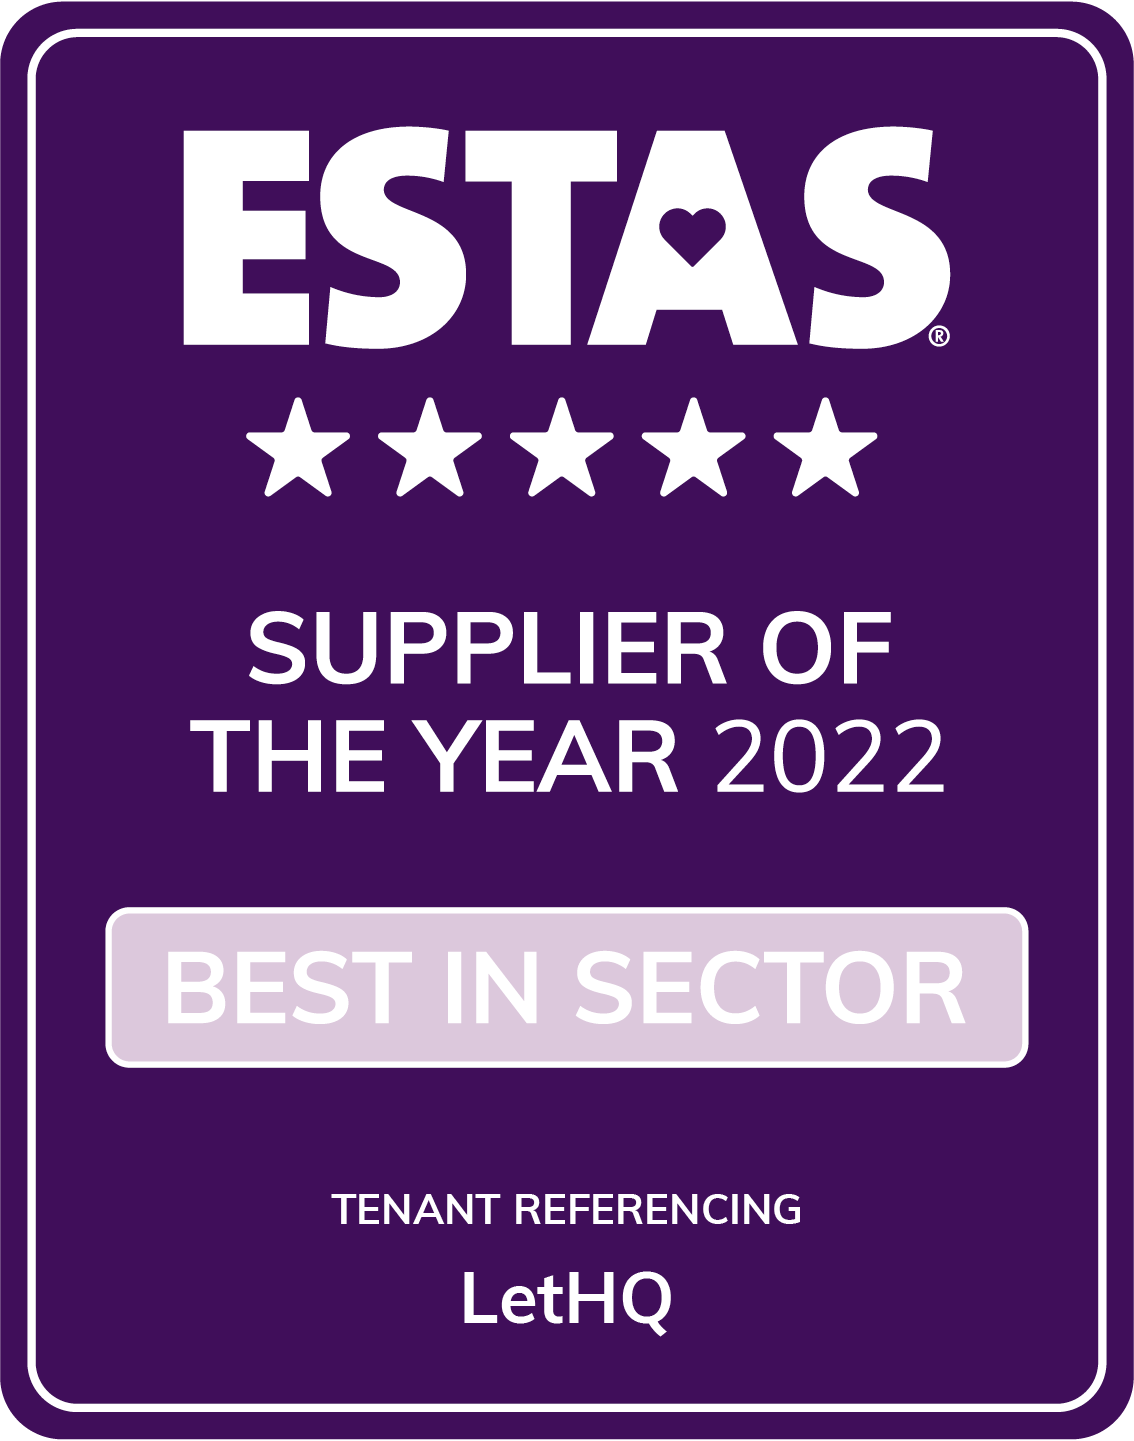 ESTAS Supplier of the Year 2022 - Best in Sector - Tenant Referencing - LetHQ